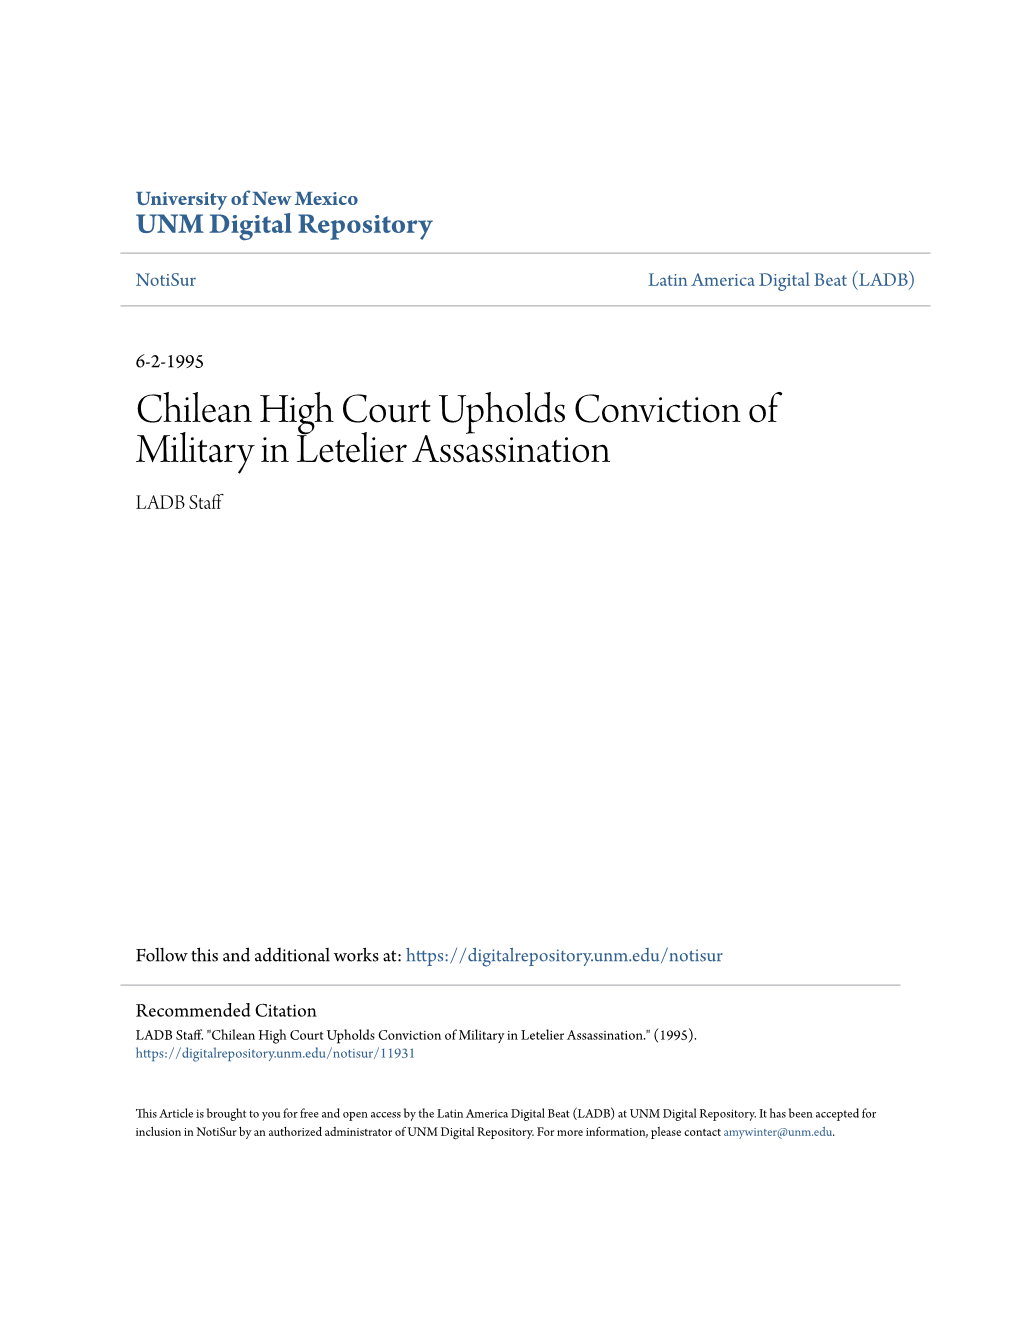 Chilean High Court Upholds Conviction of Military in Letelier Assassination LADB Staff